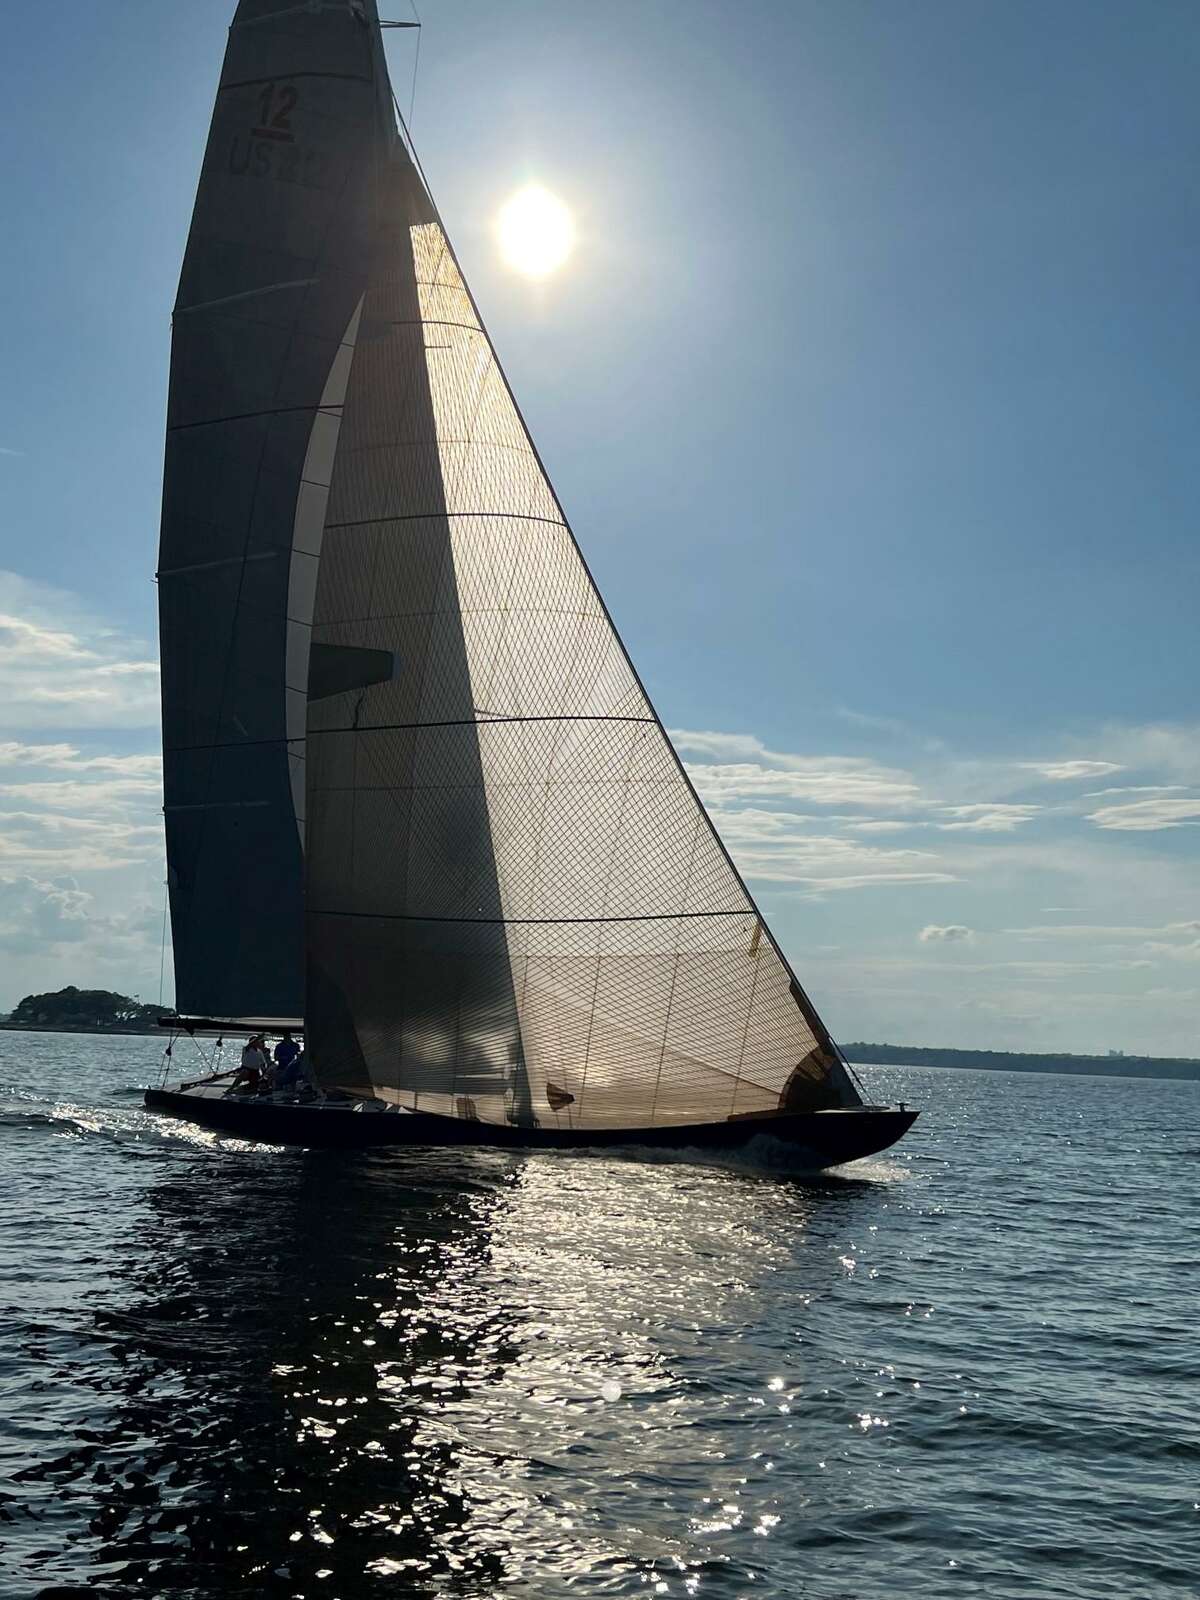 The 1980 America’s Cup competitor Lionheart, shown here, will be racing against 1962 cup winner Weatherly Oct. 1 and Oct. 2 at Steelepointe Harbor for a fundraising event benefiting the Klein Memorial Auditorium